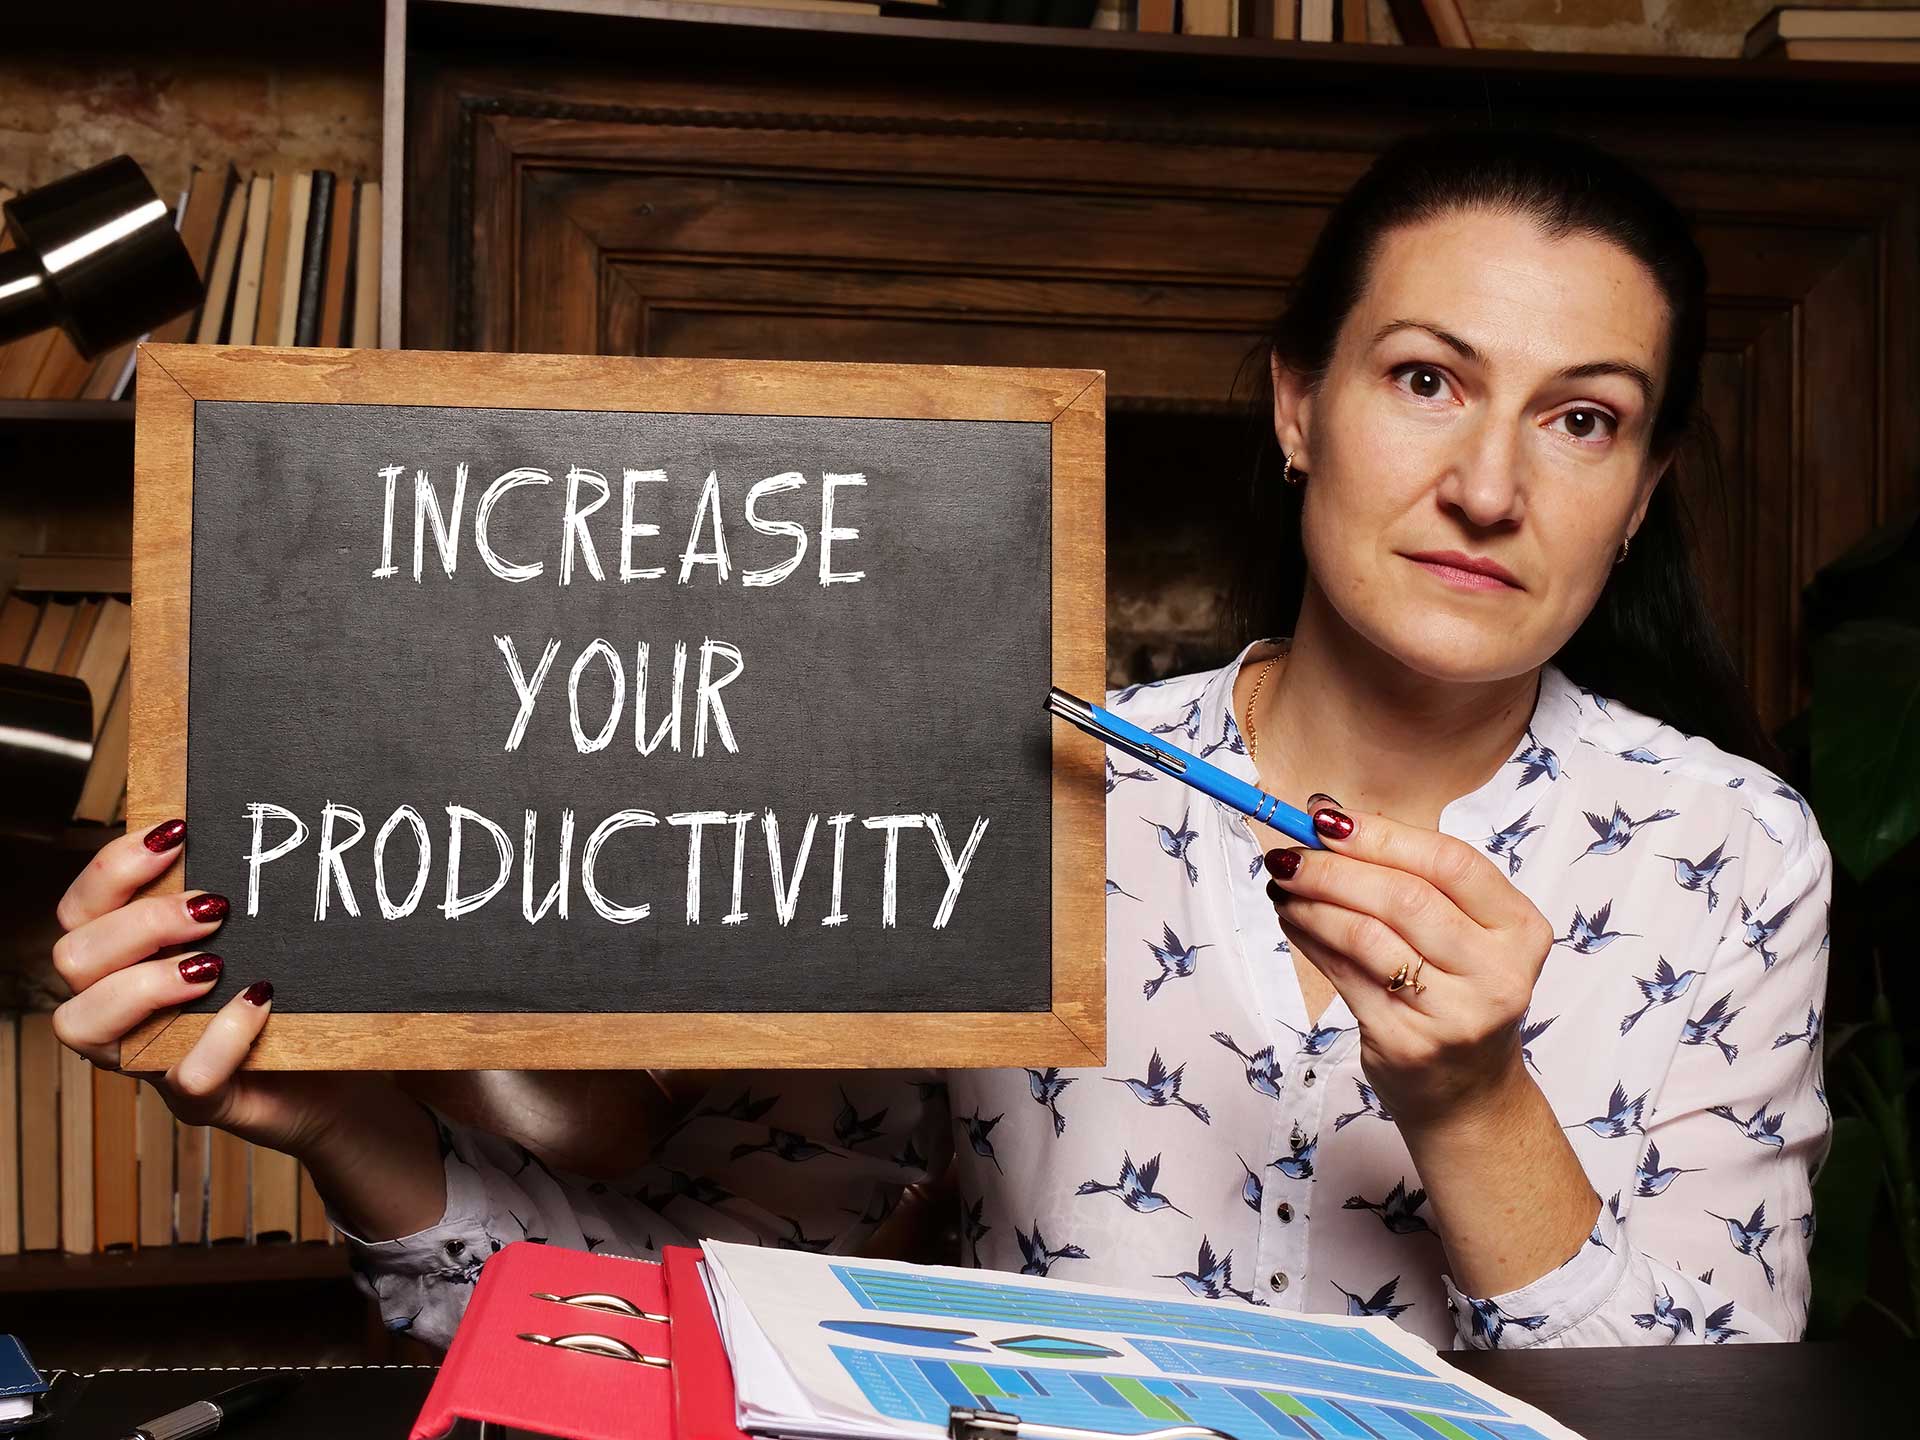 10 things You Should do to Increase Your Productivity